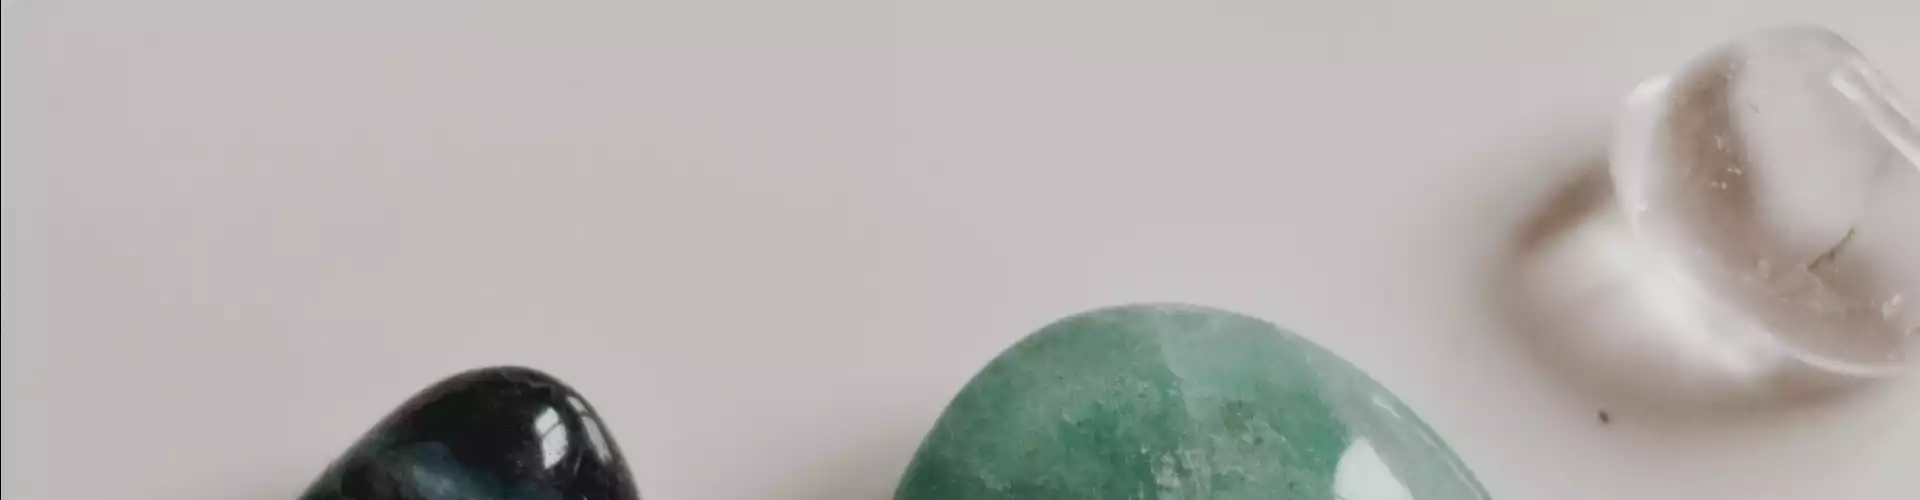 #105- 4 Green Stones in 30 Minutes